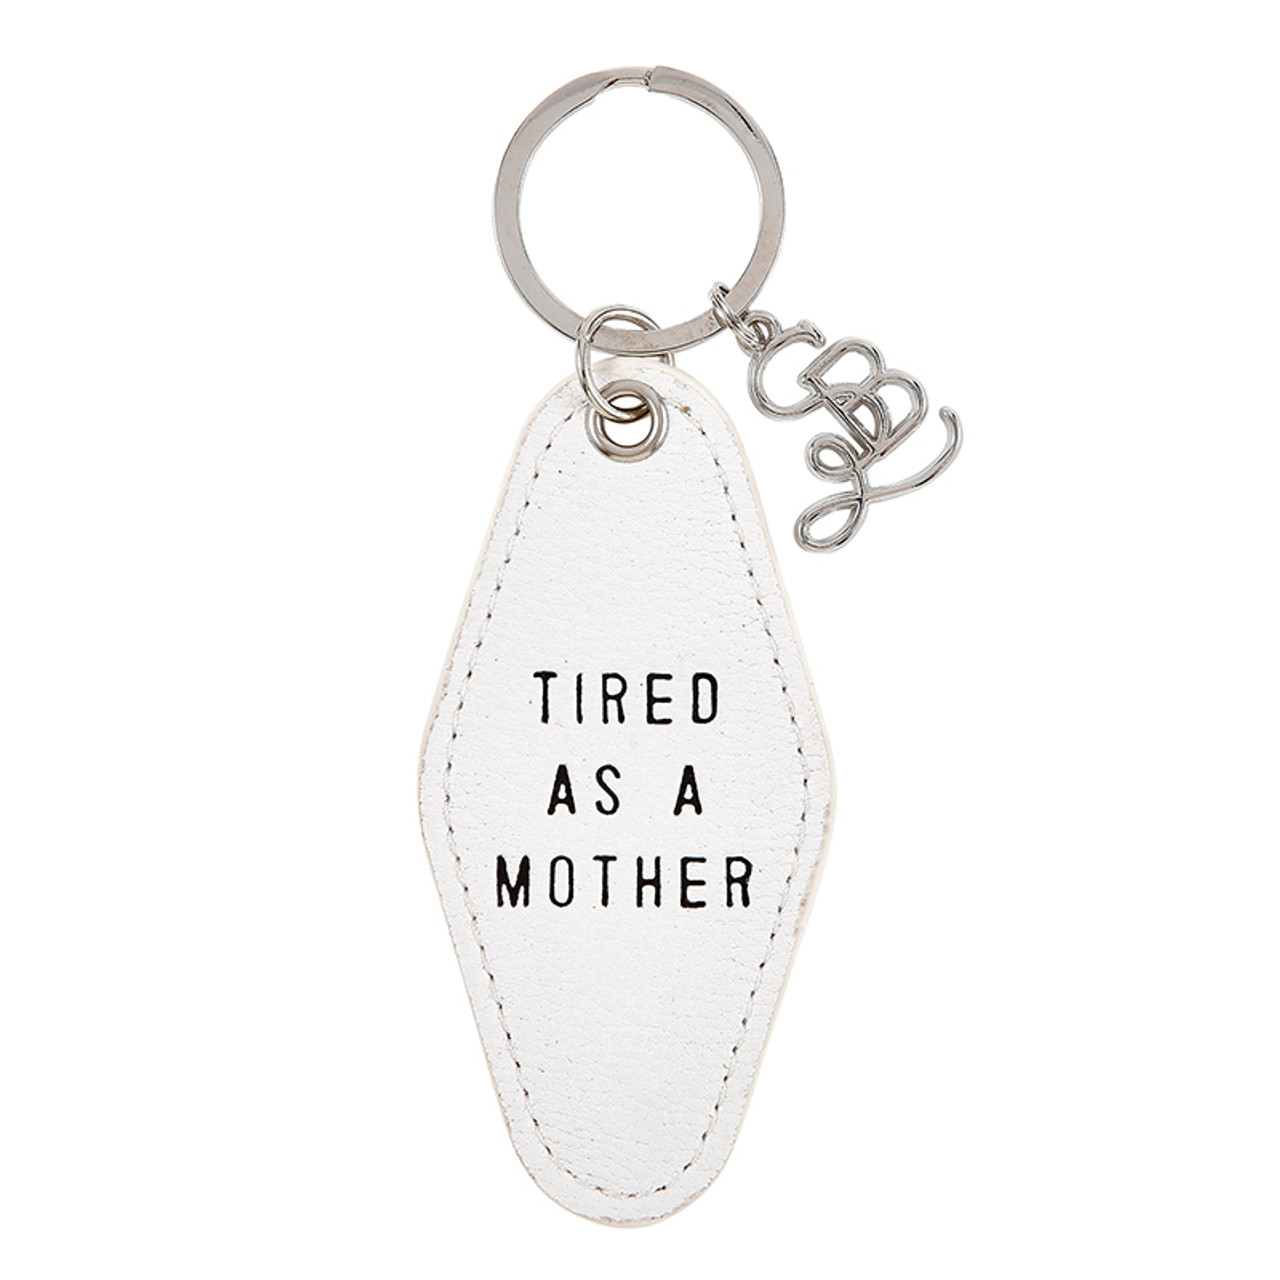 Thelma and Louise Wristlet Keychain